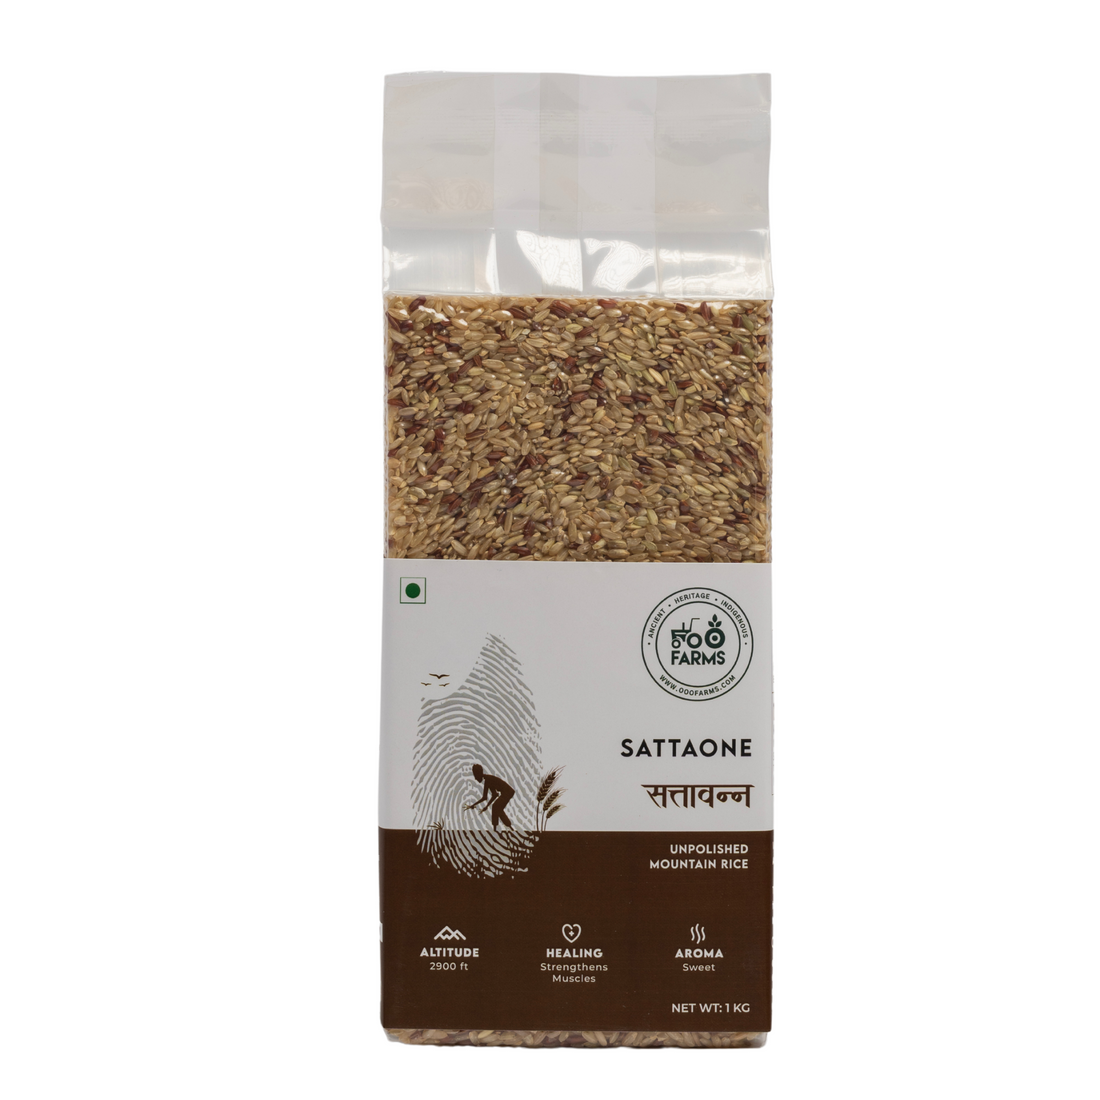 OOO Farms Sattaone Rice (Unpolished) Package Frontside